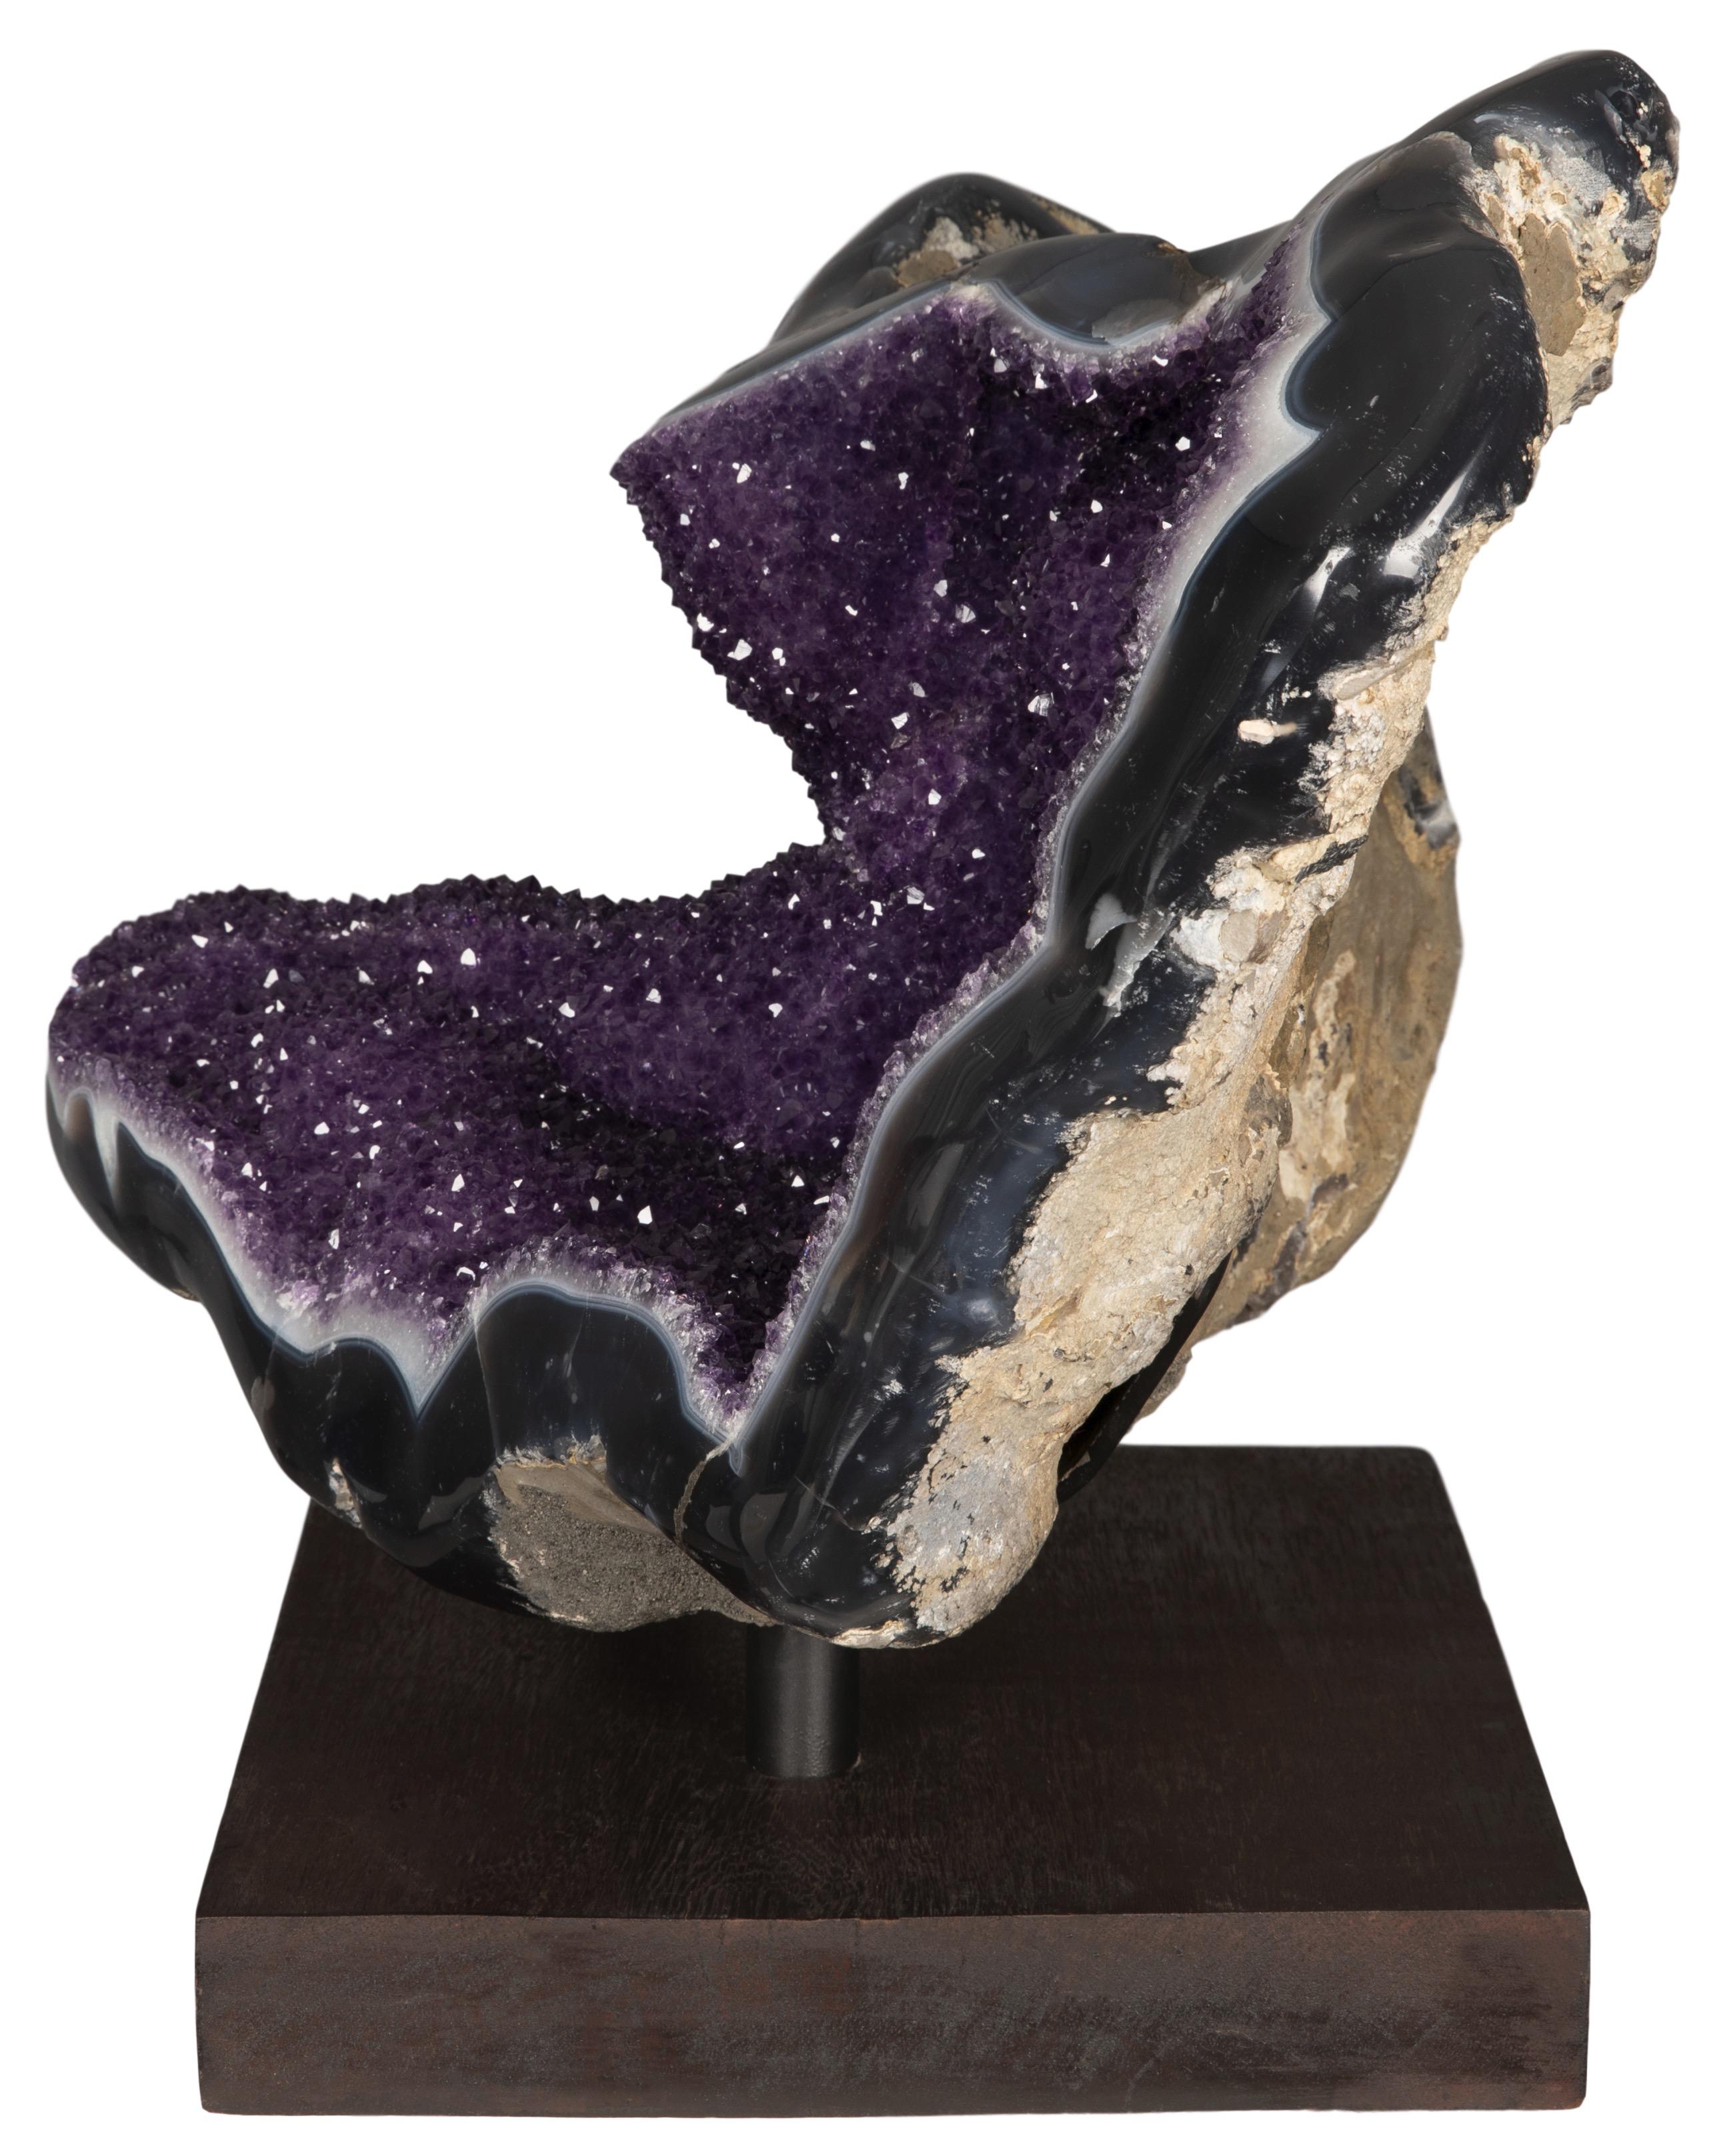 The electric intensity of this piece’s colouration makes it both stunning and unique. The sparkling colour and natural wave-like form makes for a hypnotic sculpture evoking a sense of movement. Its shape allows us to imagine how this geode was